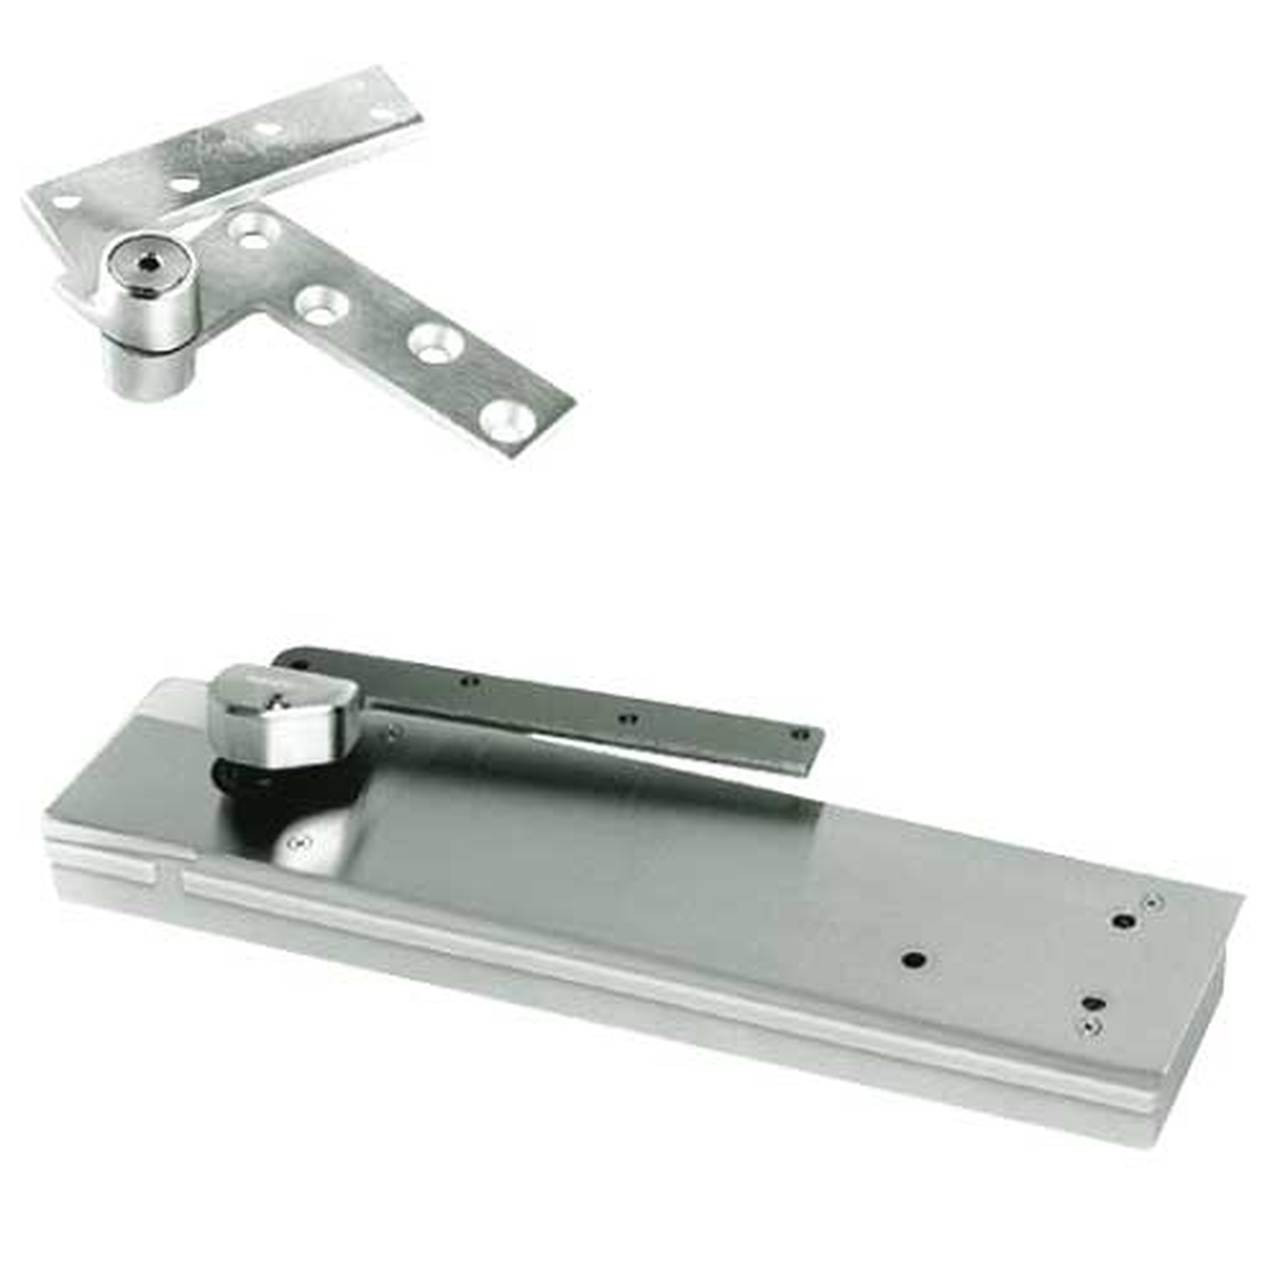 FHM5103NBC-LH-618 Rixson HM51 Series 3/4" Offset Hung Shallow Depth Floor Closers in Bright Nickel Finish